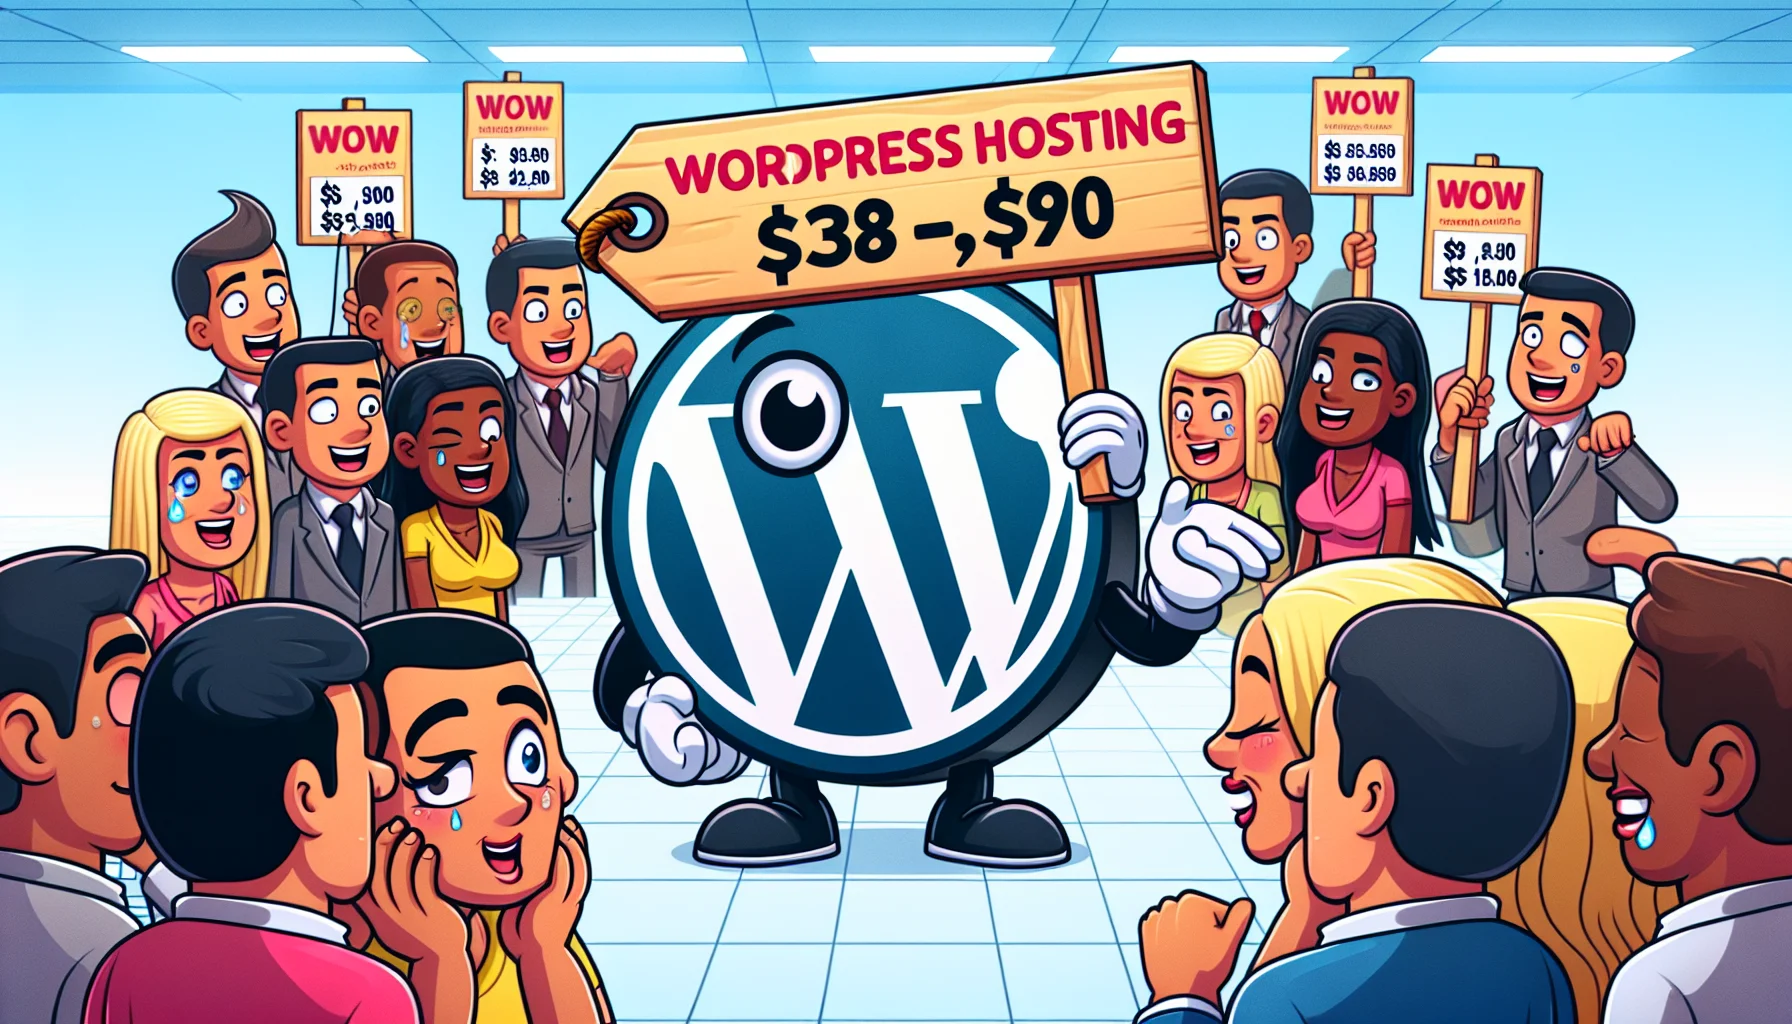 Create a humorous and enticing image that reveals a low-cost WordPress hosting scenario. The scene should display a cartoon WordPress logo winking and holding a price tag showing a ridiculously low price. This should be set in a virtual marketplace filled with other logos displaying visibly higher prices. In the background, spectator characters with various reactions – some surprised, some intrigued, and others laughing – at the unbelievably low cost of the WordPress hosting. Ensure to incorporate individuals of differing genders and descents such as Hispanic female, Black male, Caucasian male, Middle Eastern female, South Asian male and a White female.